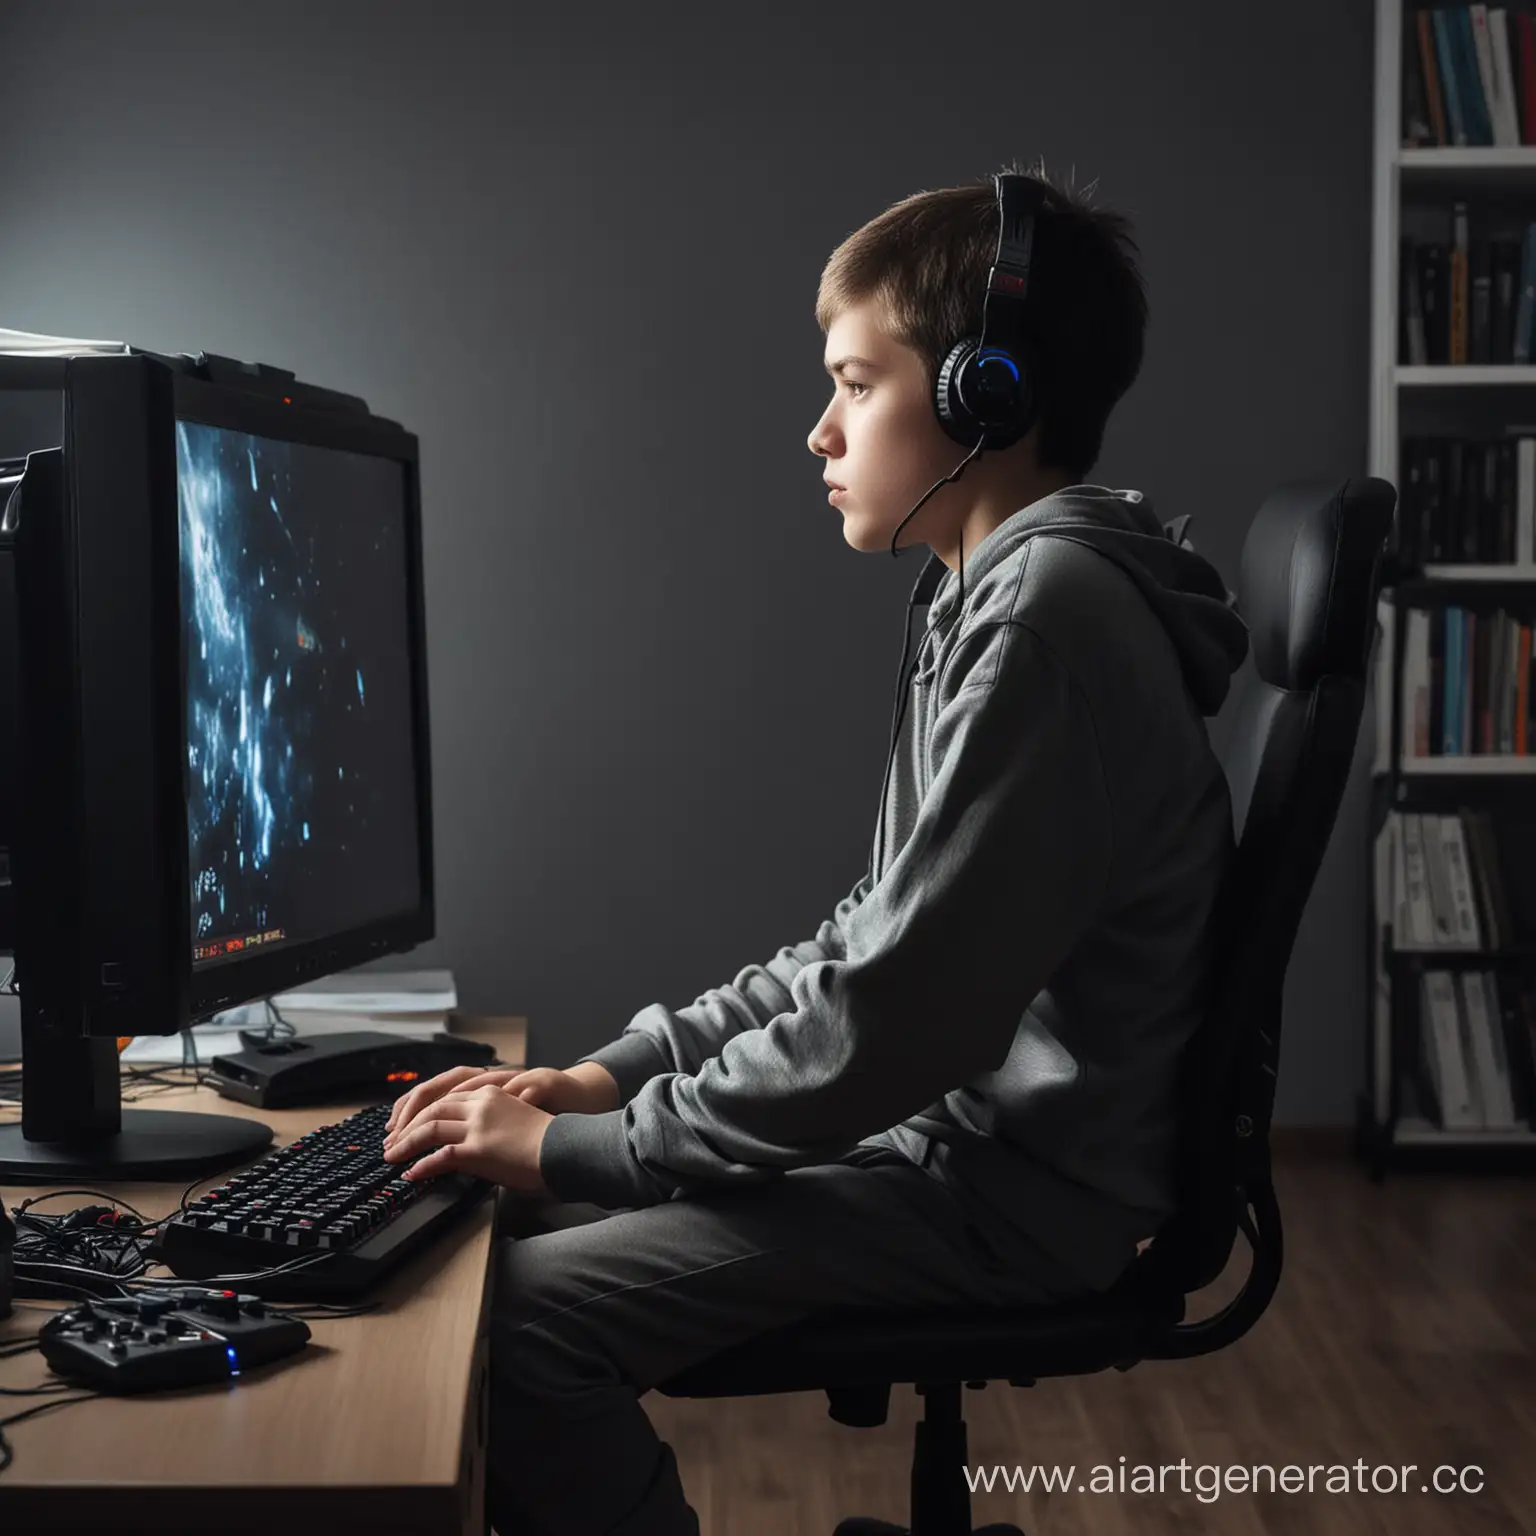 Youth-Gaming-Addiction-A-Dark-Room-Experience